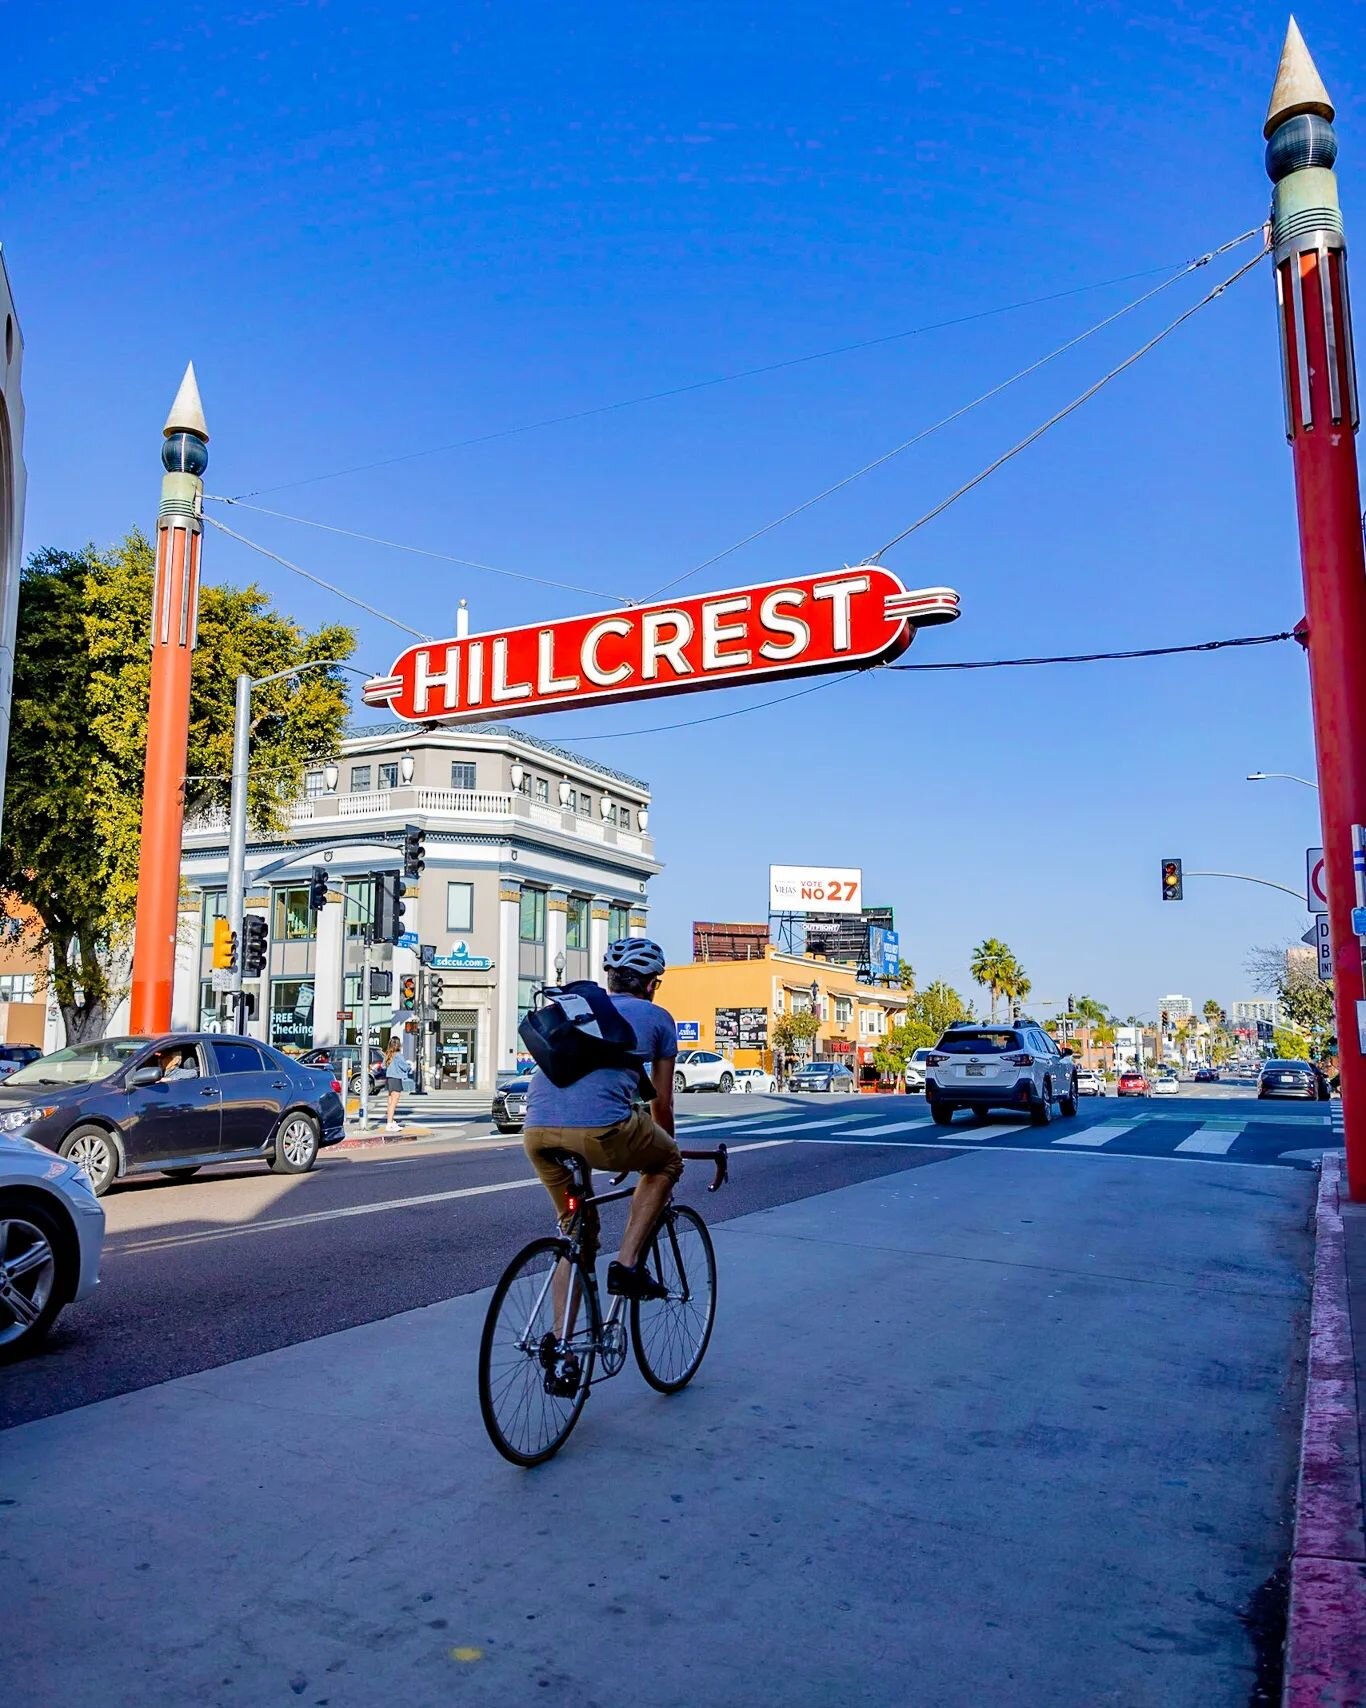 Happy National Bike to Work Day! 🚲 

Hillcrest is home to multiple bike lanes. Have you ridden the new 4th and 5th bike lanes?